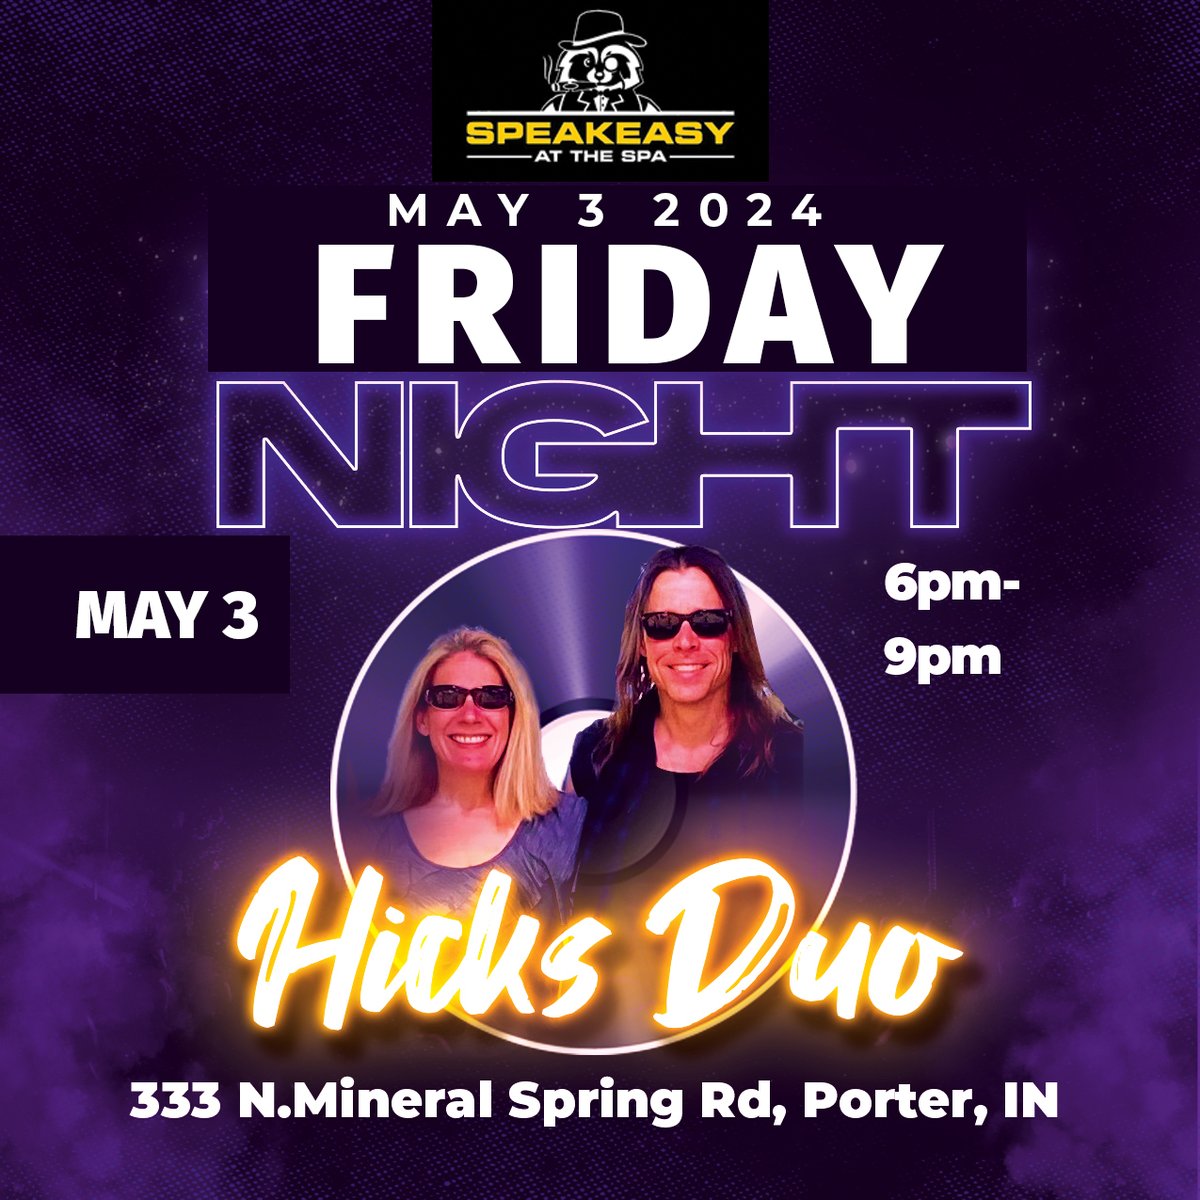 Join us for live music by #HicksDuo at #SpeakeasyattheSpa this Friday Night from 6 pm to 9 pm! 🎶 Don't miss out on the perfect start to your weekend!
.
.
.
.
#LiveMusic #FridayNightVibes #entertainment #musicevents #concertnight #LiveMusicExperience #porterindiana #Indiana